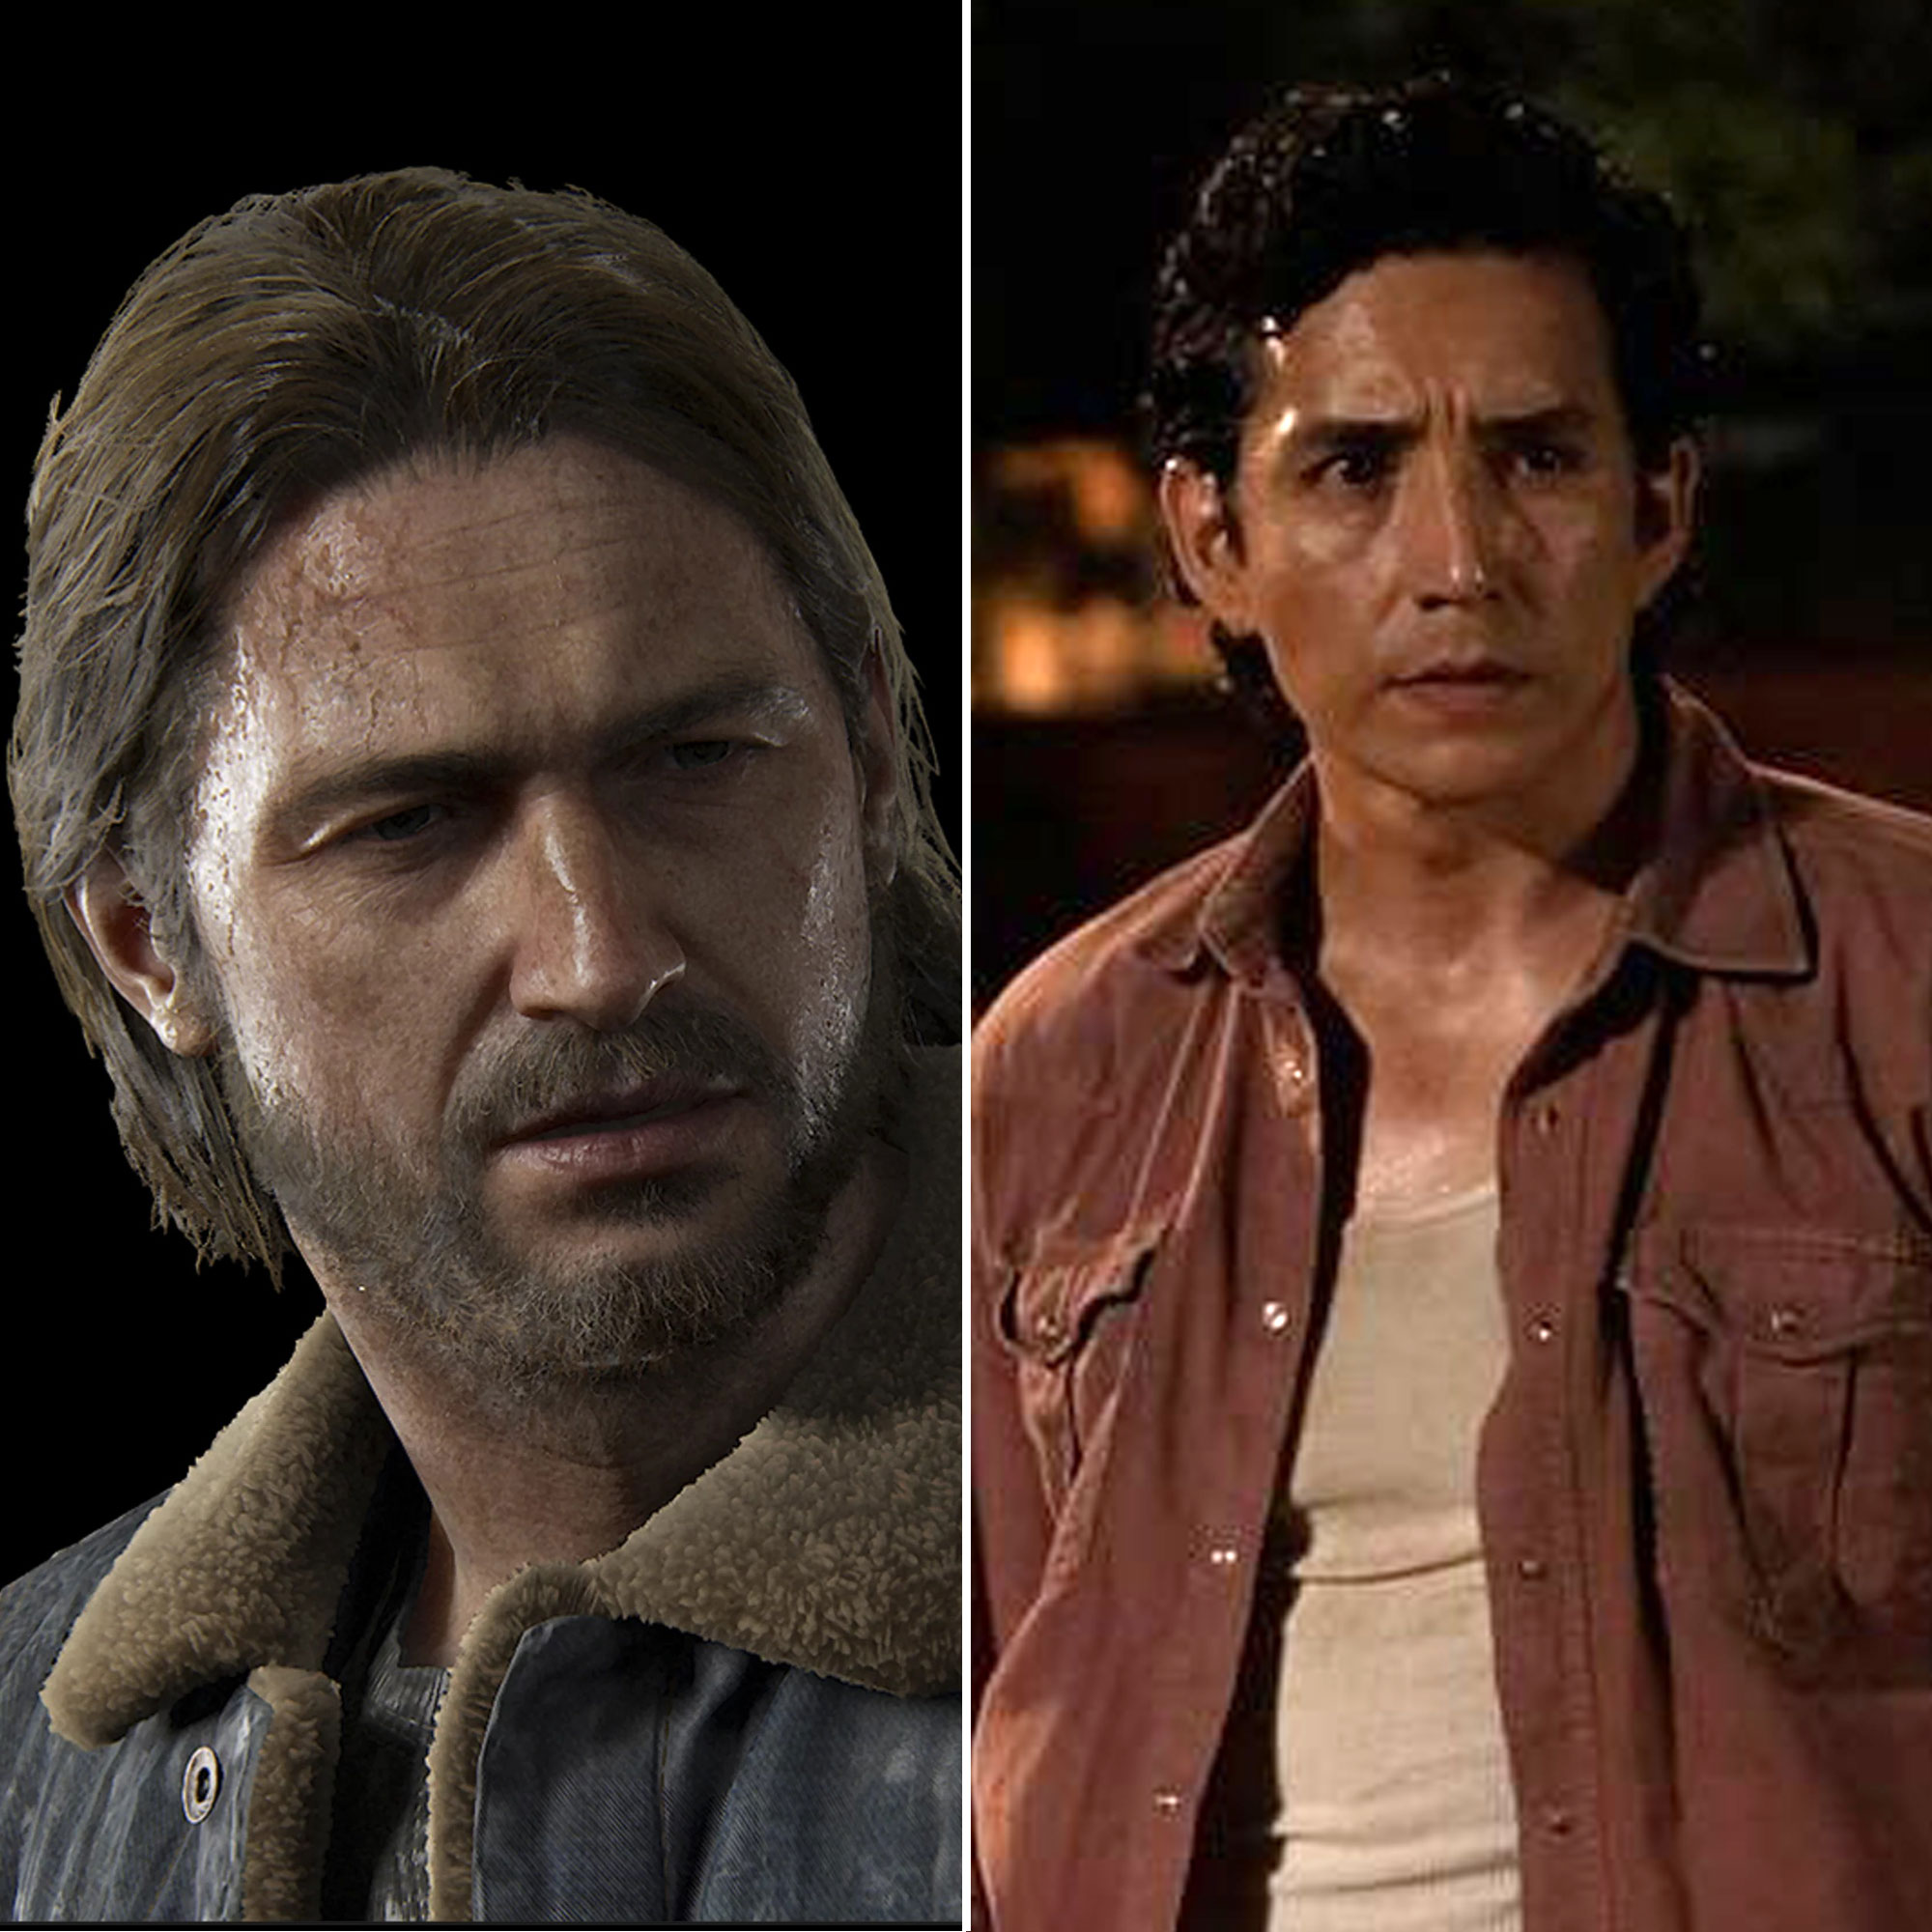 HBO's The Last of Us Series Casts Gabriel Luna as Tommy - IGN